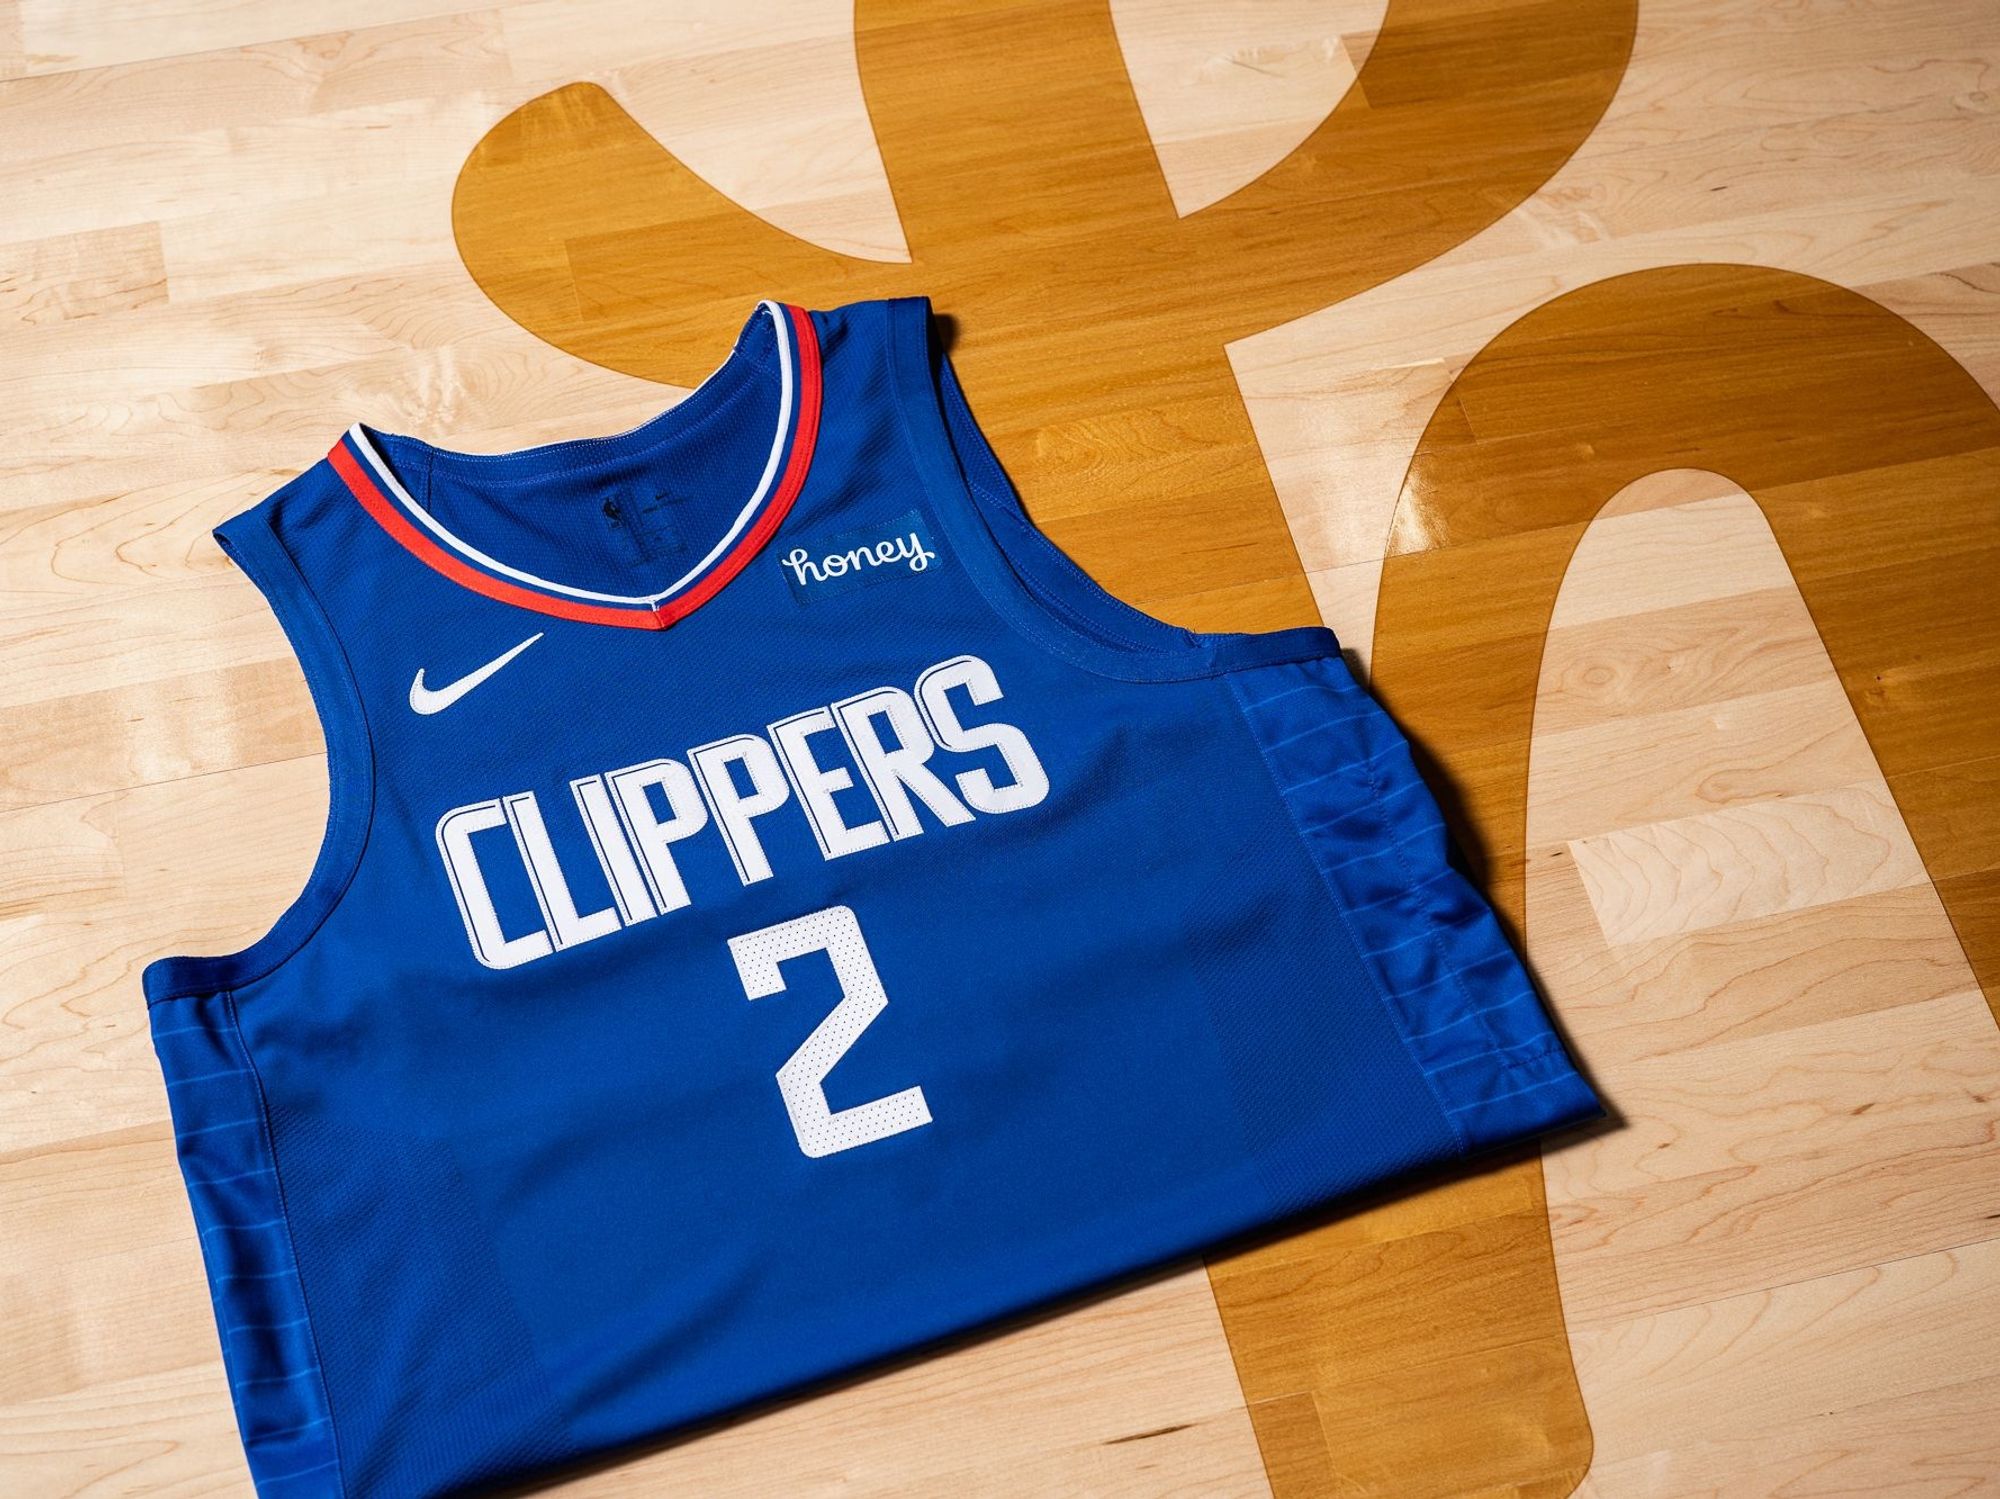 FIRST LOOK: Clippers' New White and Blue Jerseys Designed by Nike